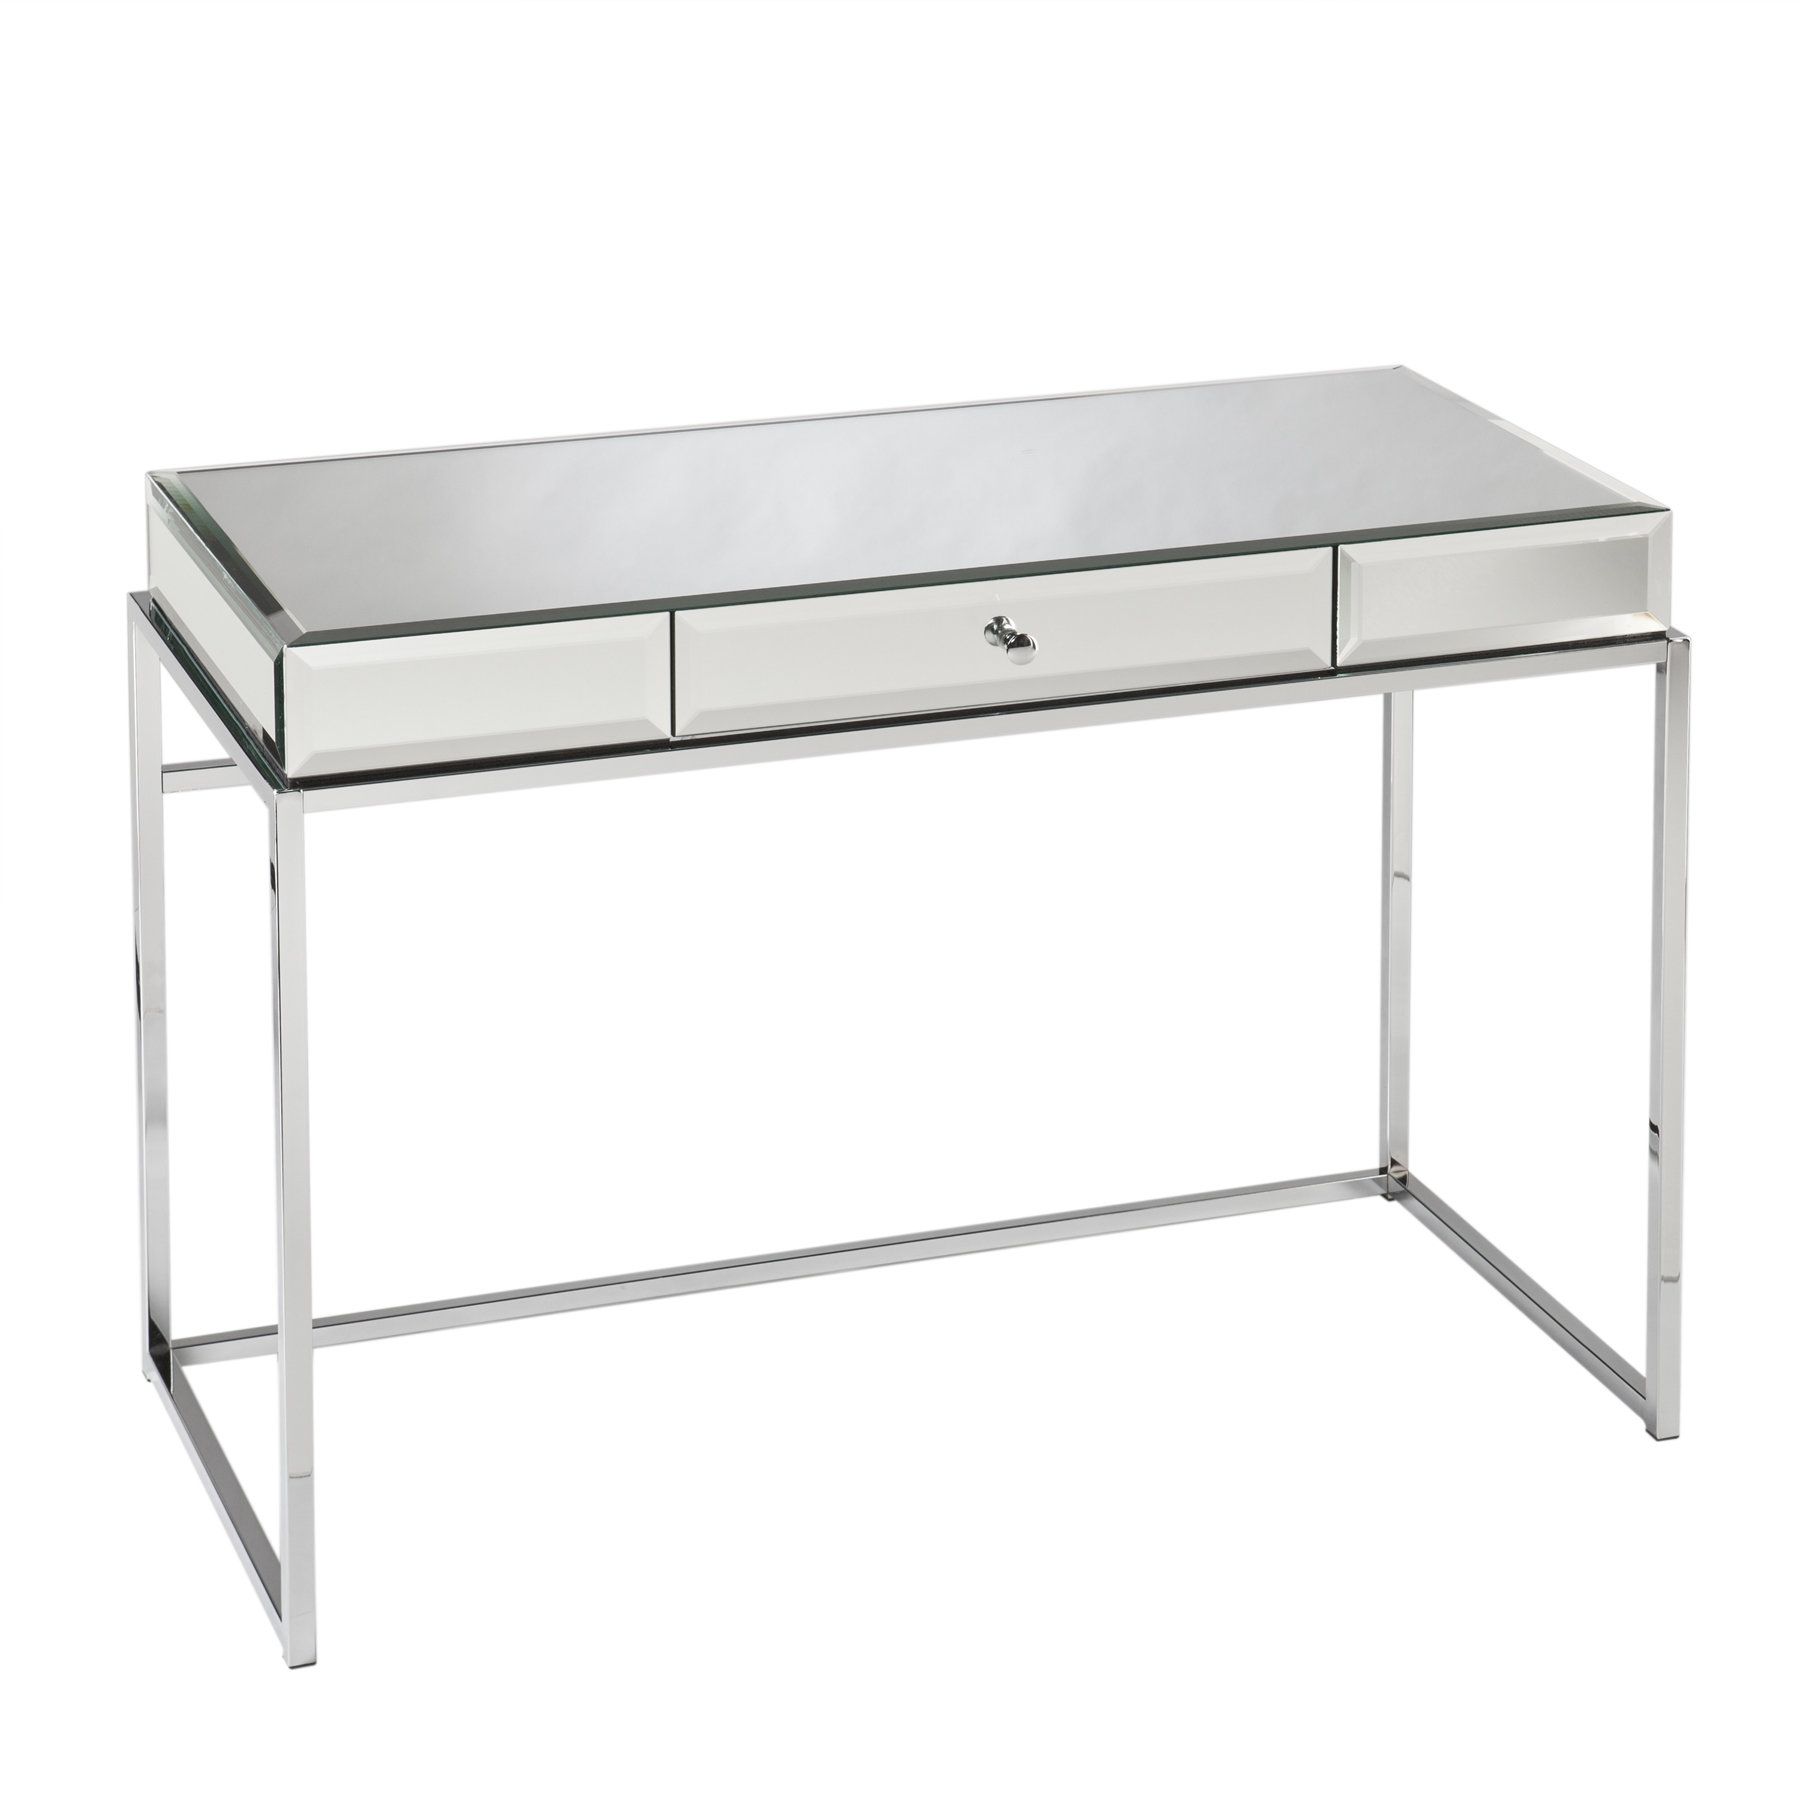 Willa Arlo Interiors Alvis 1 Drawer Writing Desk Pertaining To Alvis Traditional Metal Wall Decor (View 17 of 30)